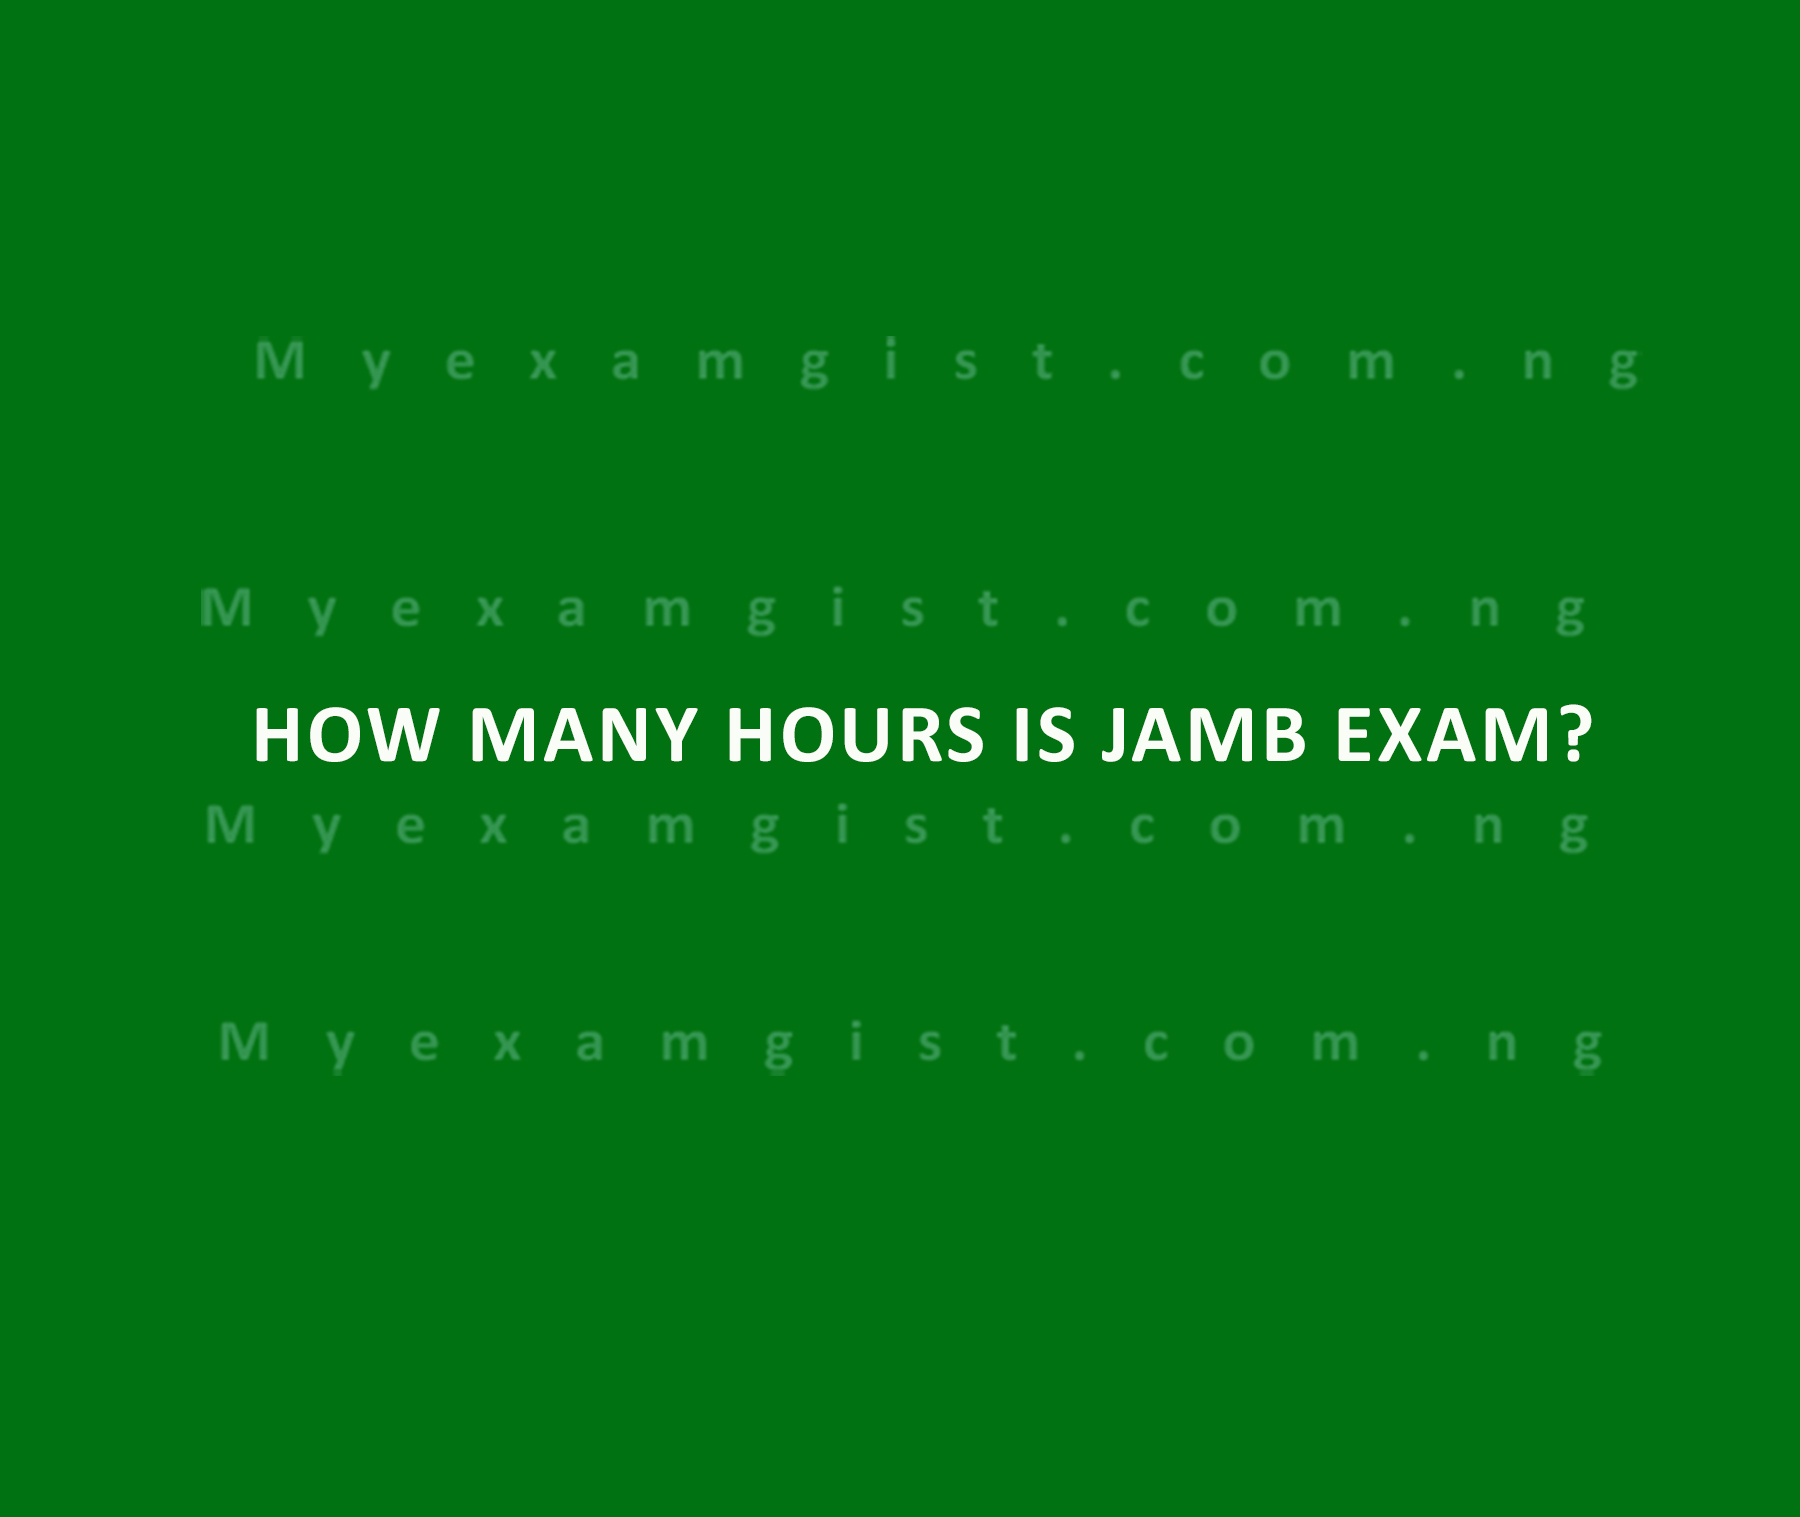 How many hours is JAMB exam?